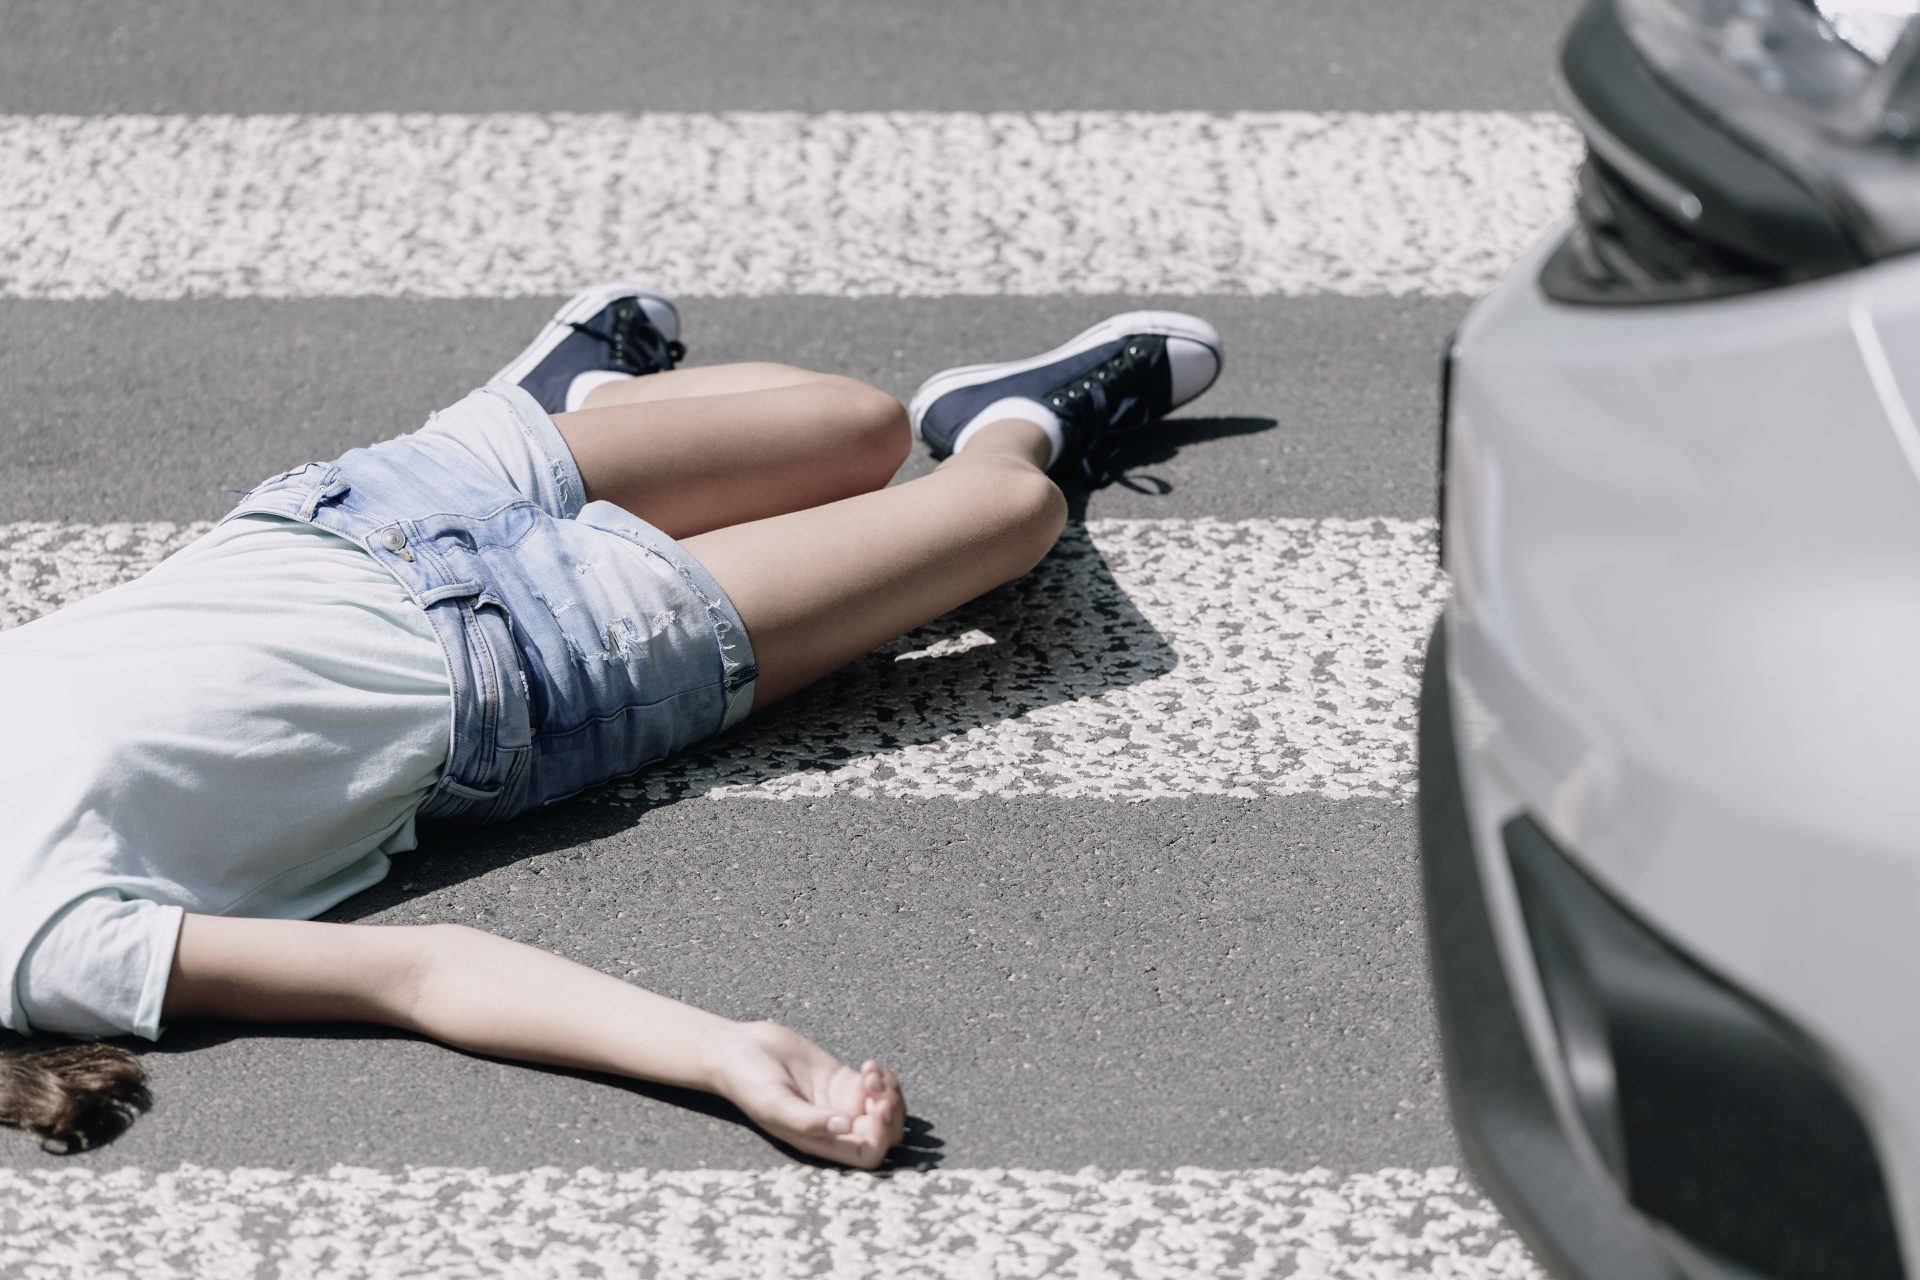 Image of a person laying in a crosswalk with a car in the shot.